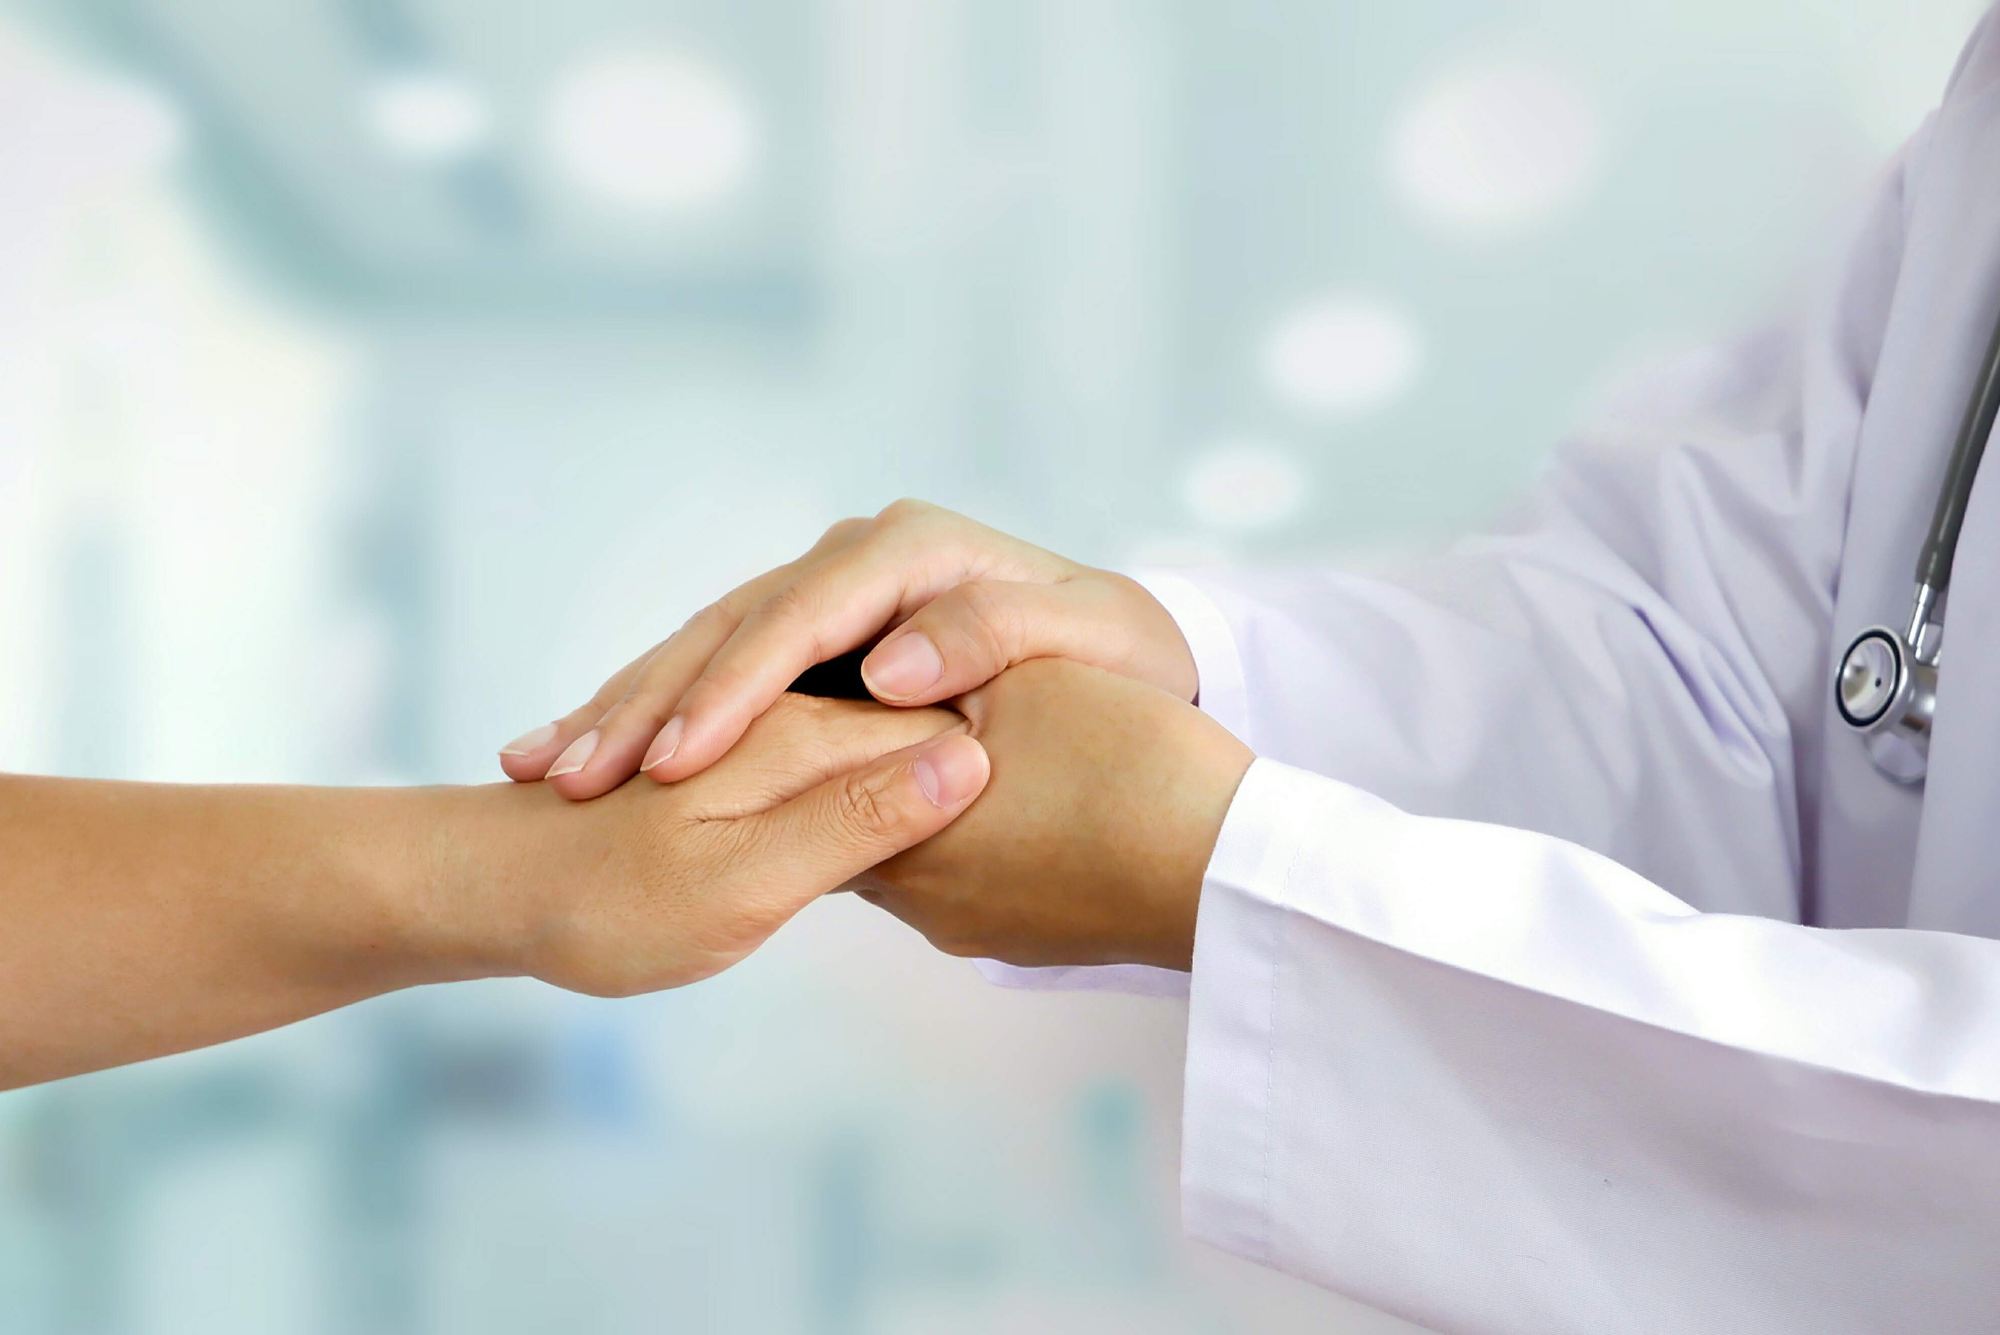 Beyond Sick Care: How Concierge Medicine Is Changing the Way We Think About Healthcare